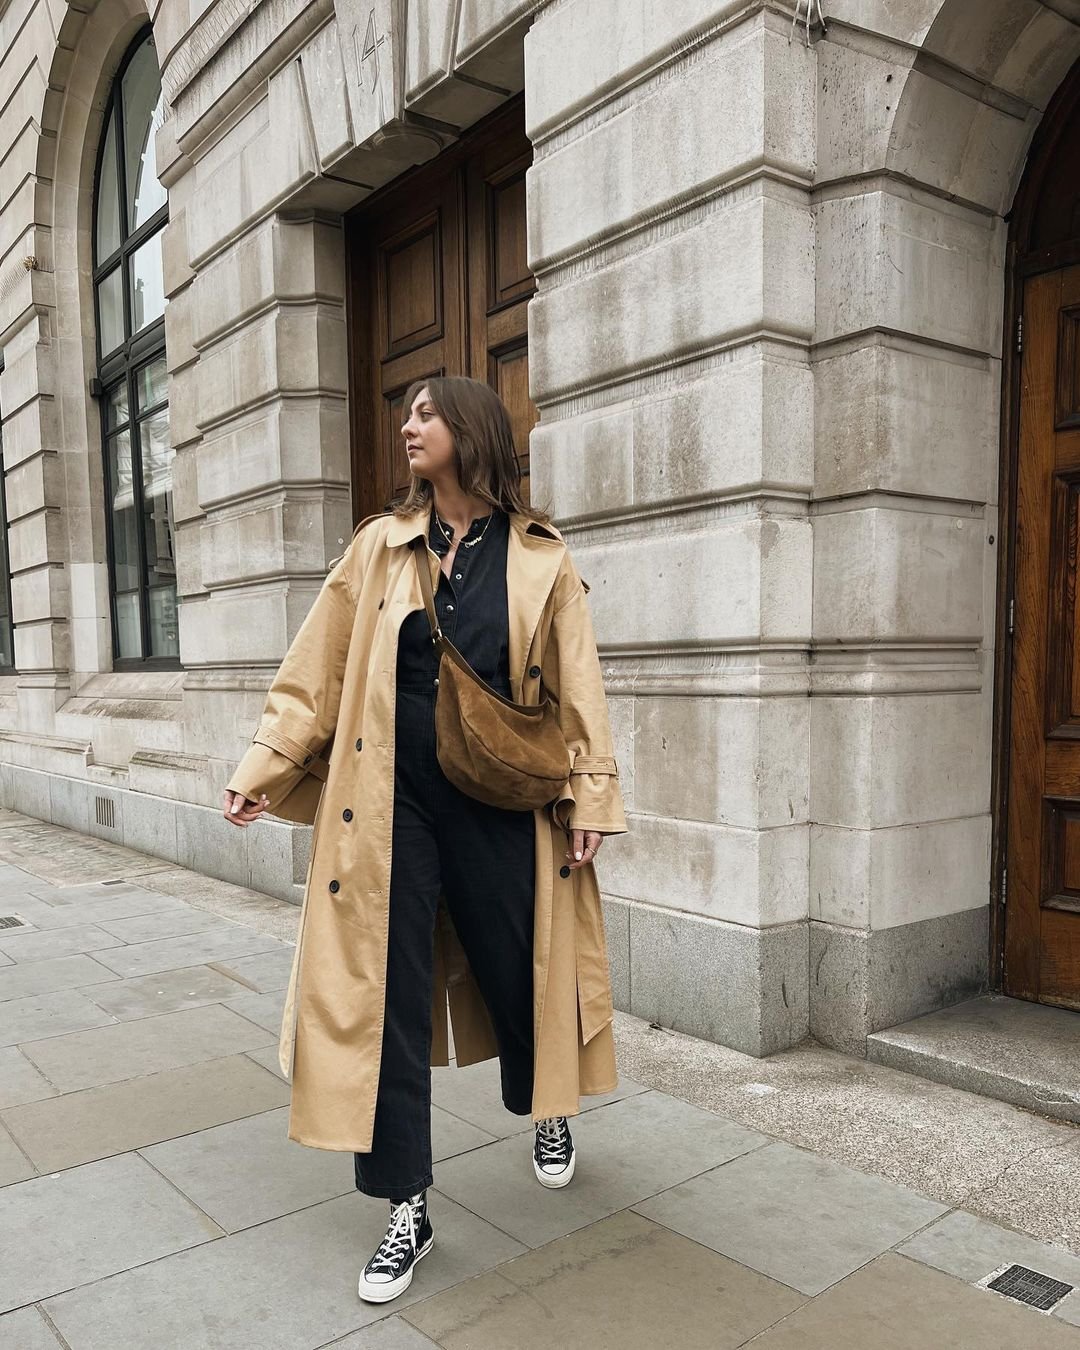 It girls - looks com All Star, macacão preto, trench coat - looks com All Star - Inverno - Street Style - https://stealthelook.com.br